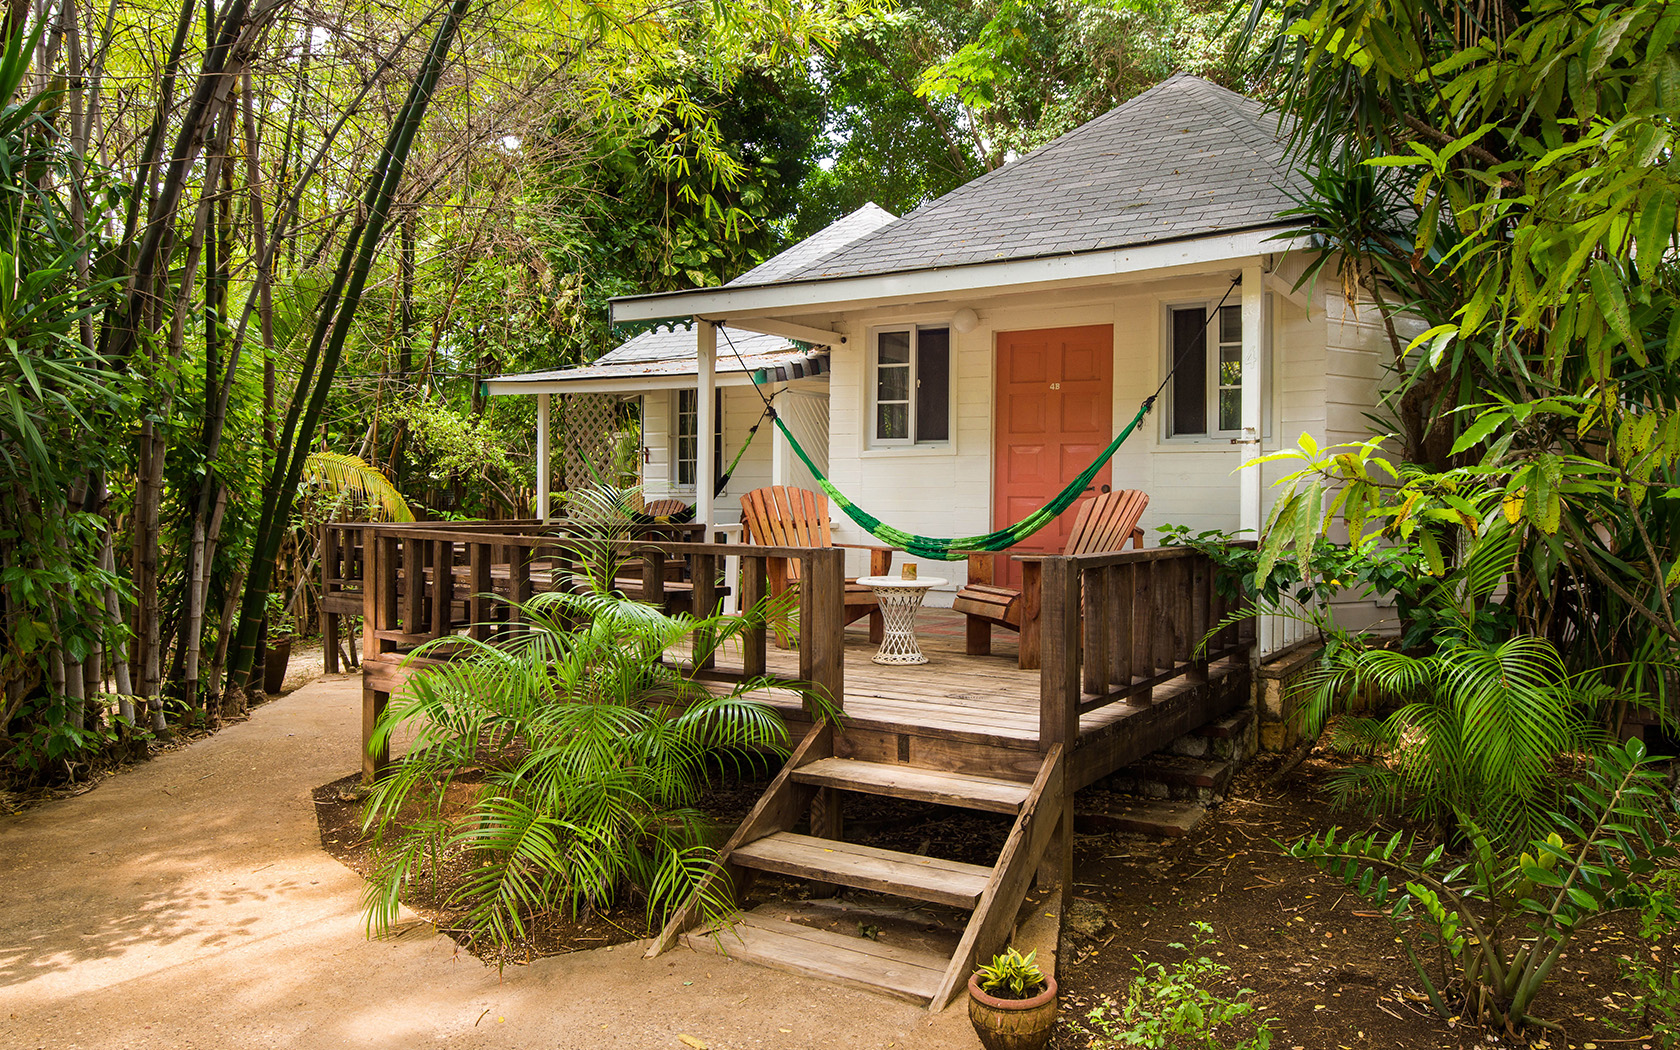 side angel of bungalow featuring a porch with hammock and seating area in tropical garden setting